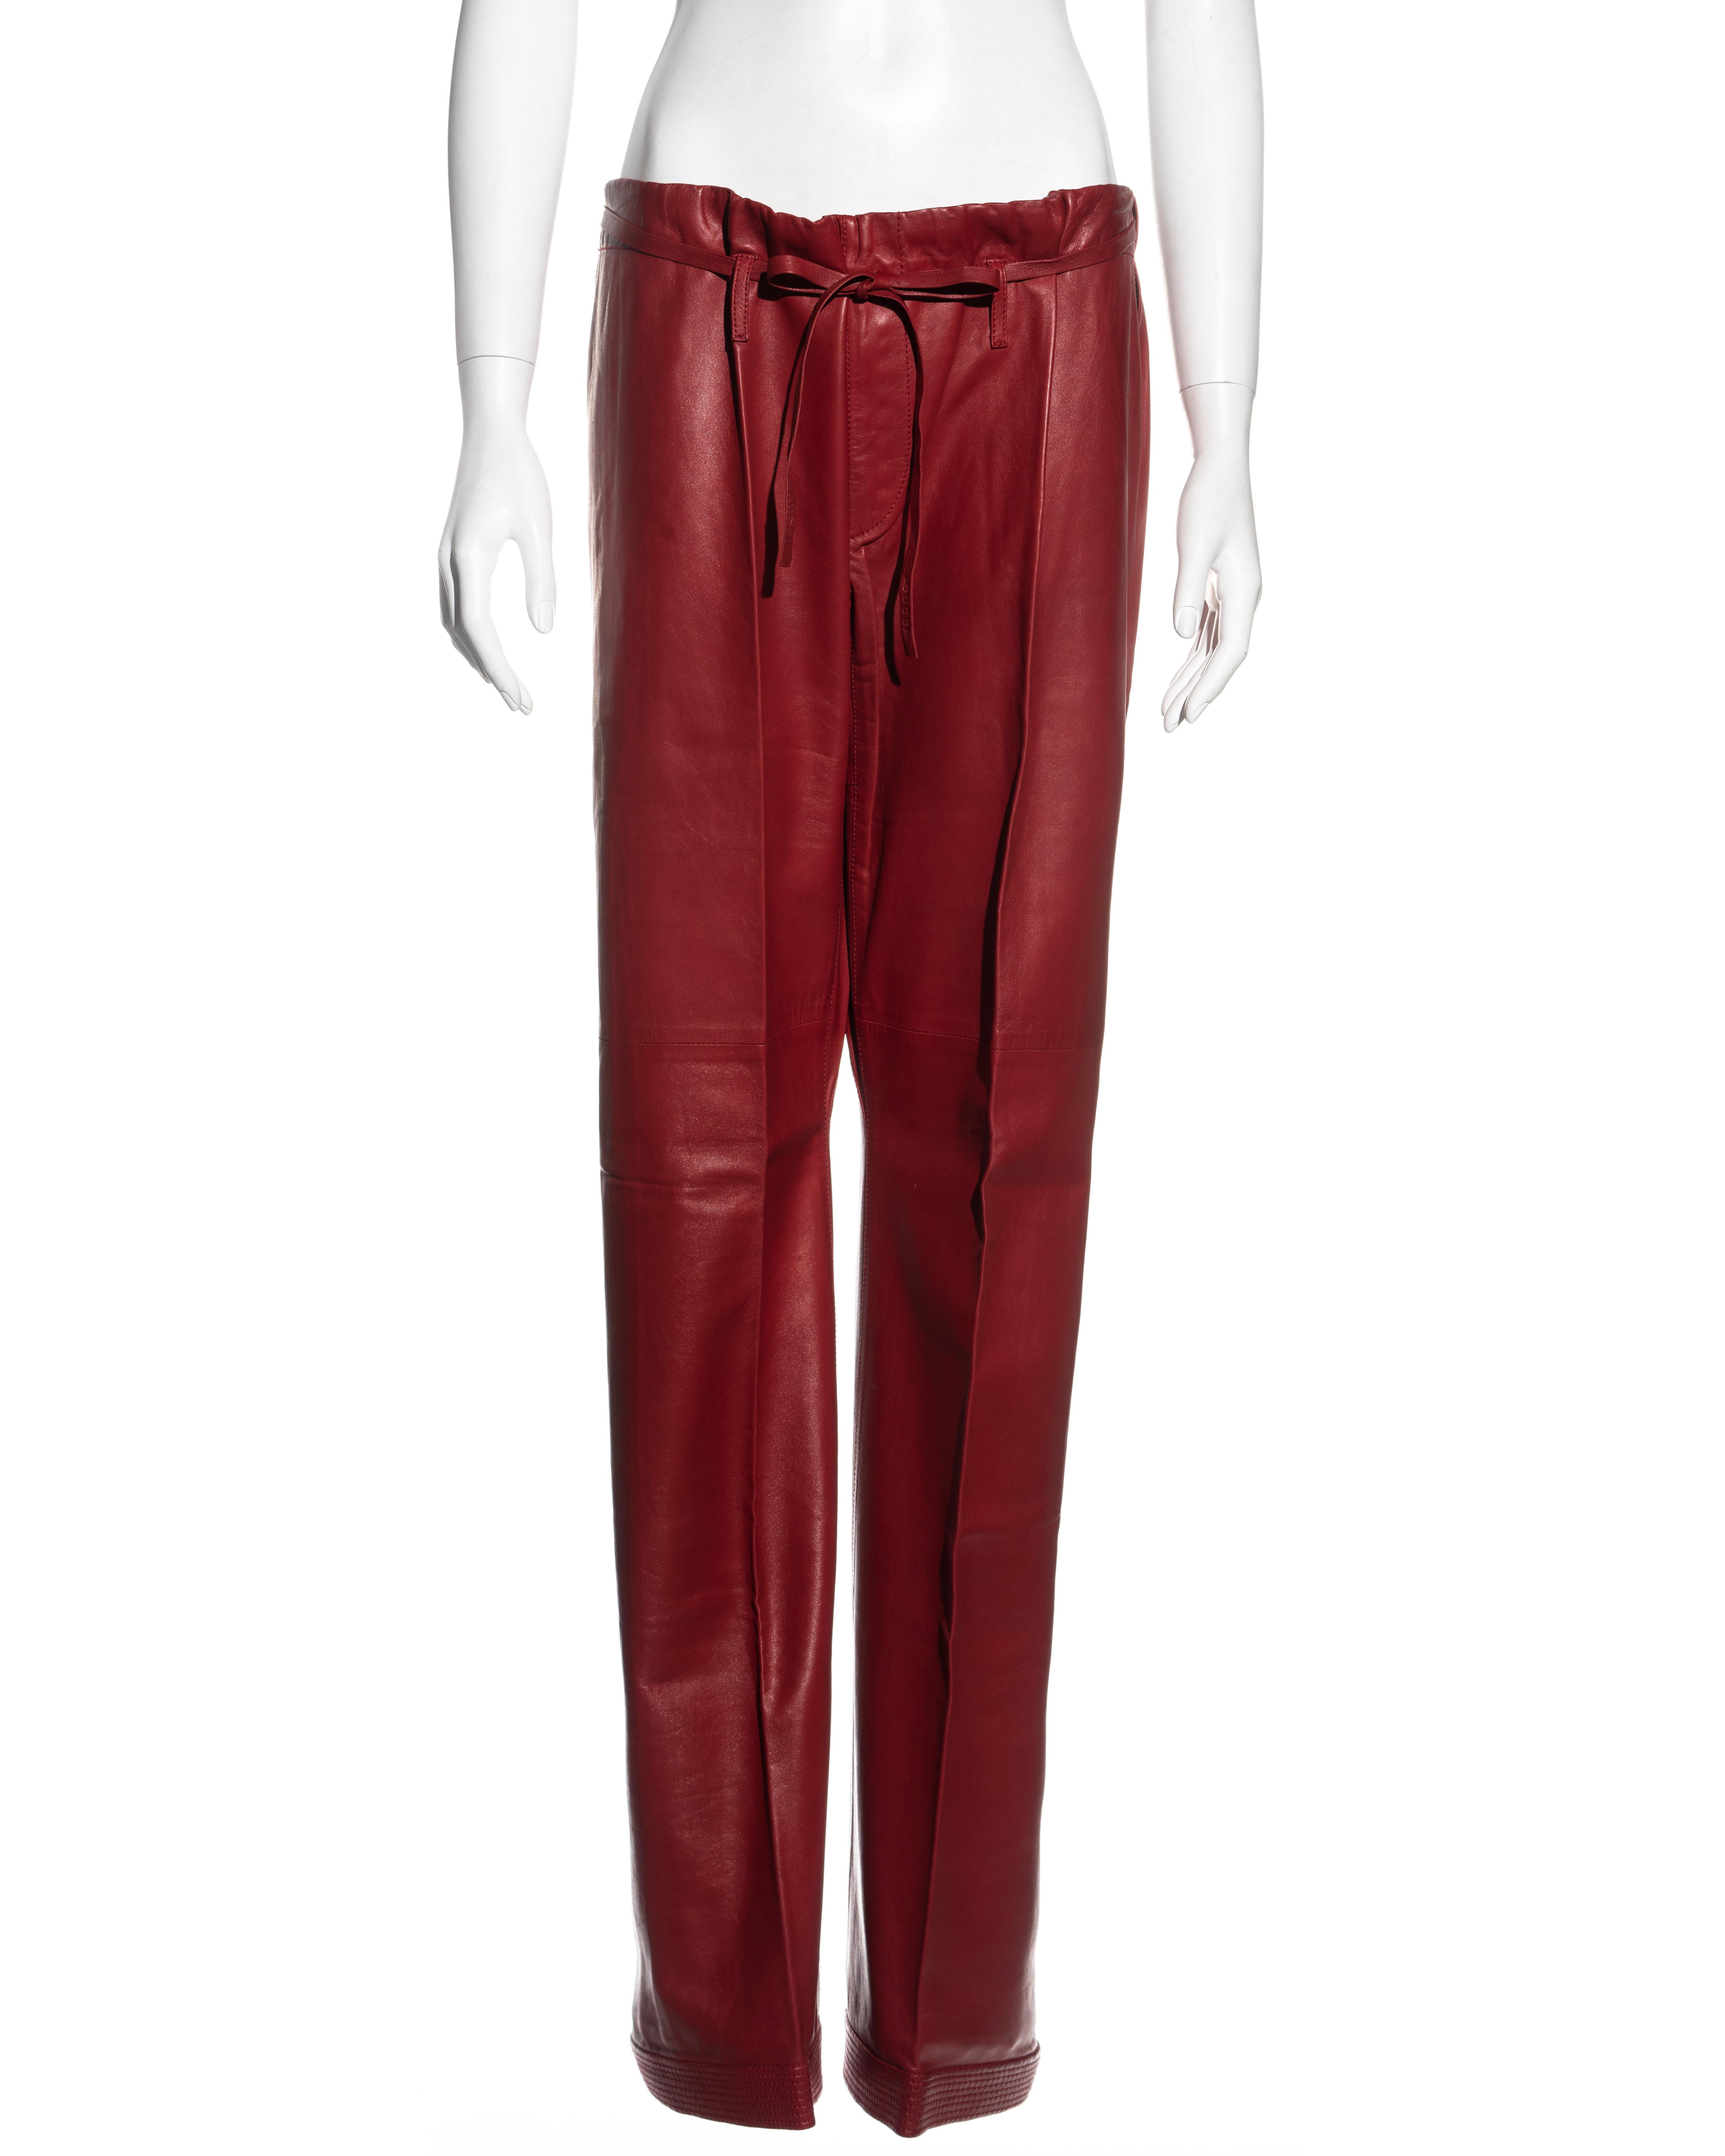 ▪ Gucci unisex pants 
▪ Designed by Tom Ford
▪ Red lambskin leather
▪ Wide leg 
▪ Drawstring waist fastening 
▪ Parallel stitch detail on the hem 
▪ Size IT 46
▪ Spring-Summer 2001
▪ 100% Leather
▪ Made in Italy